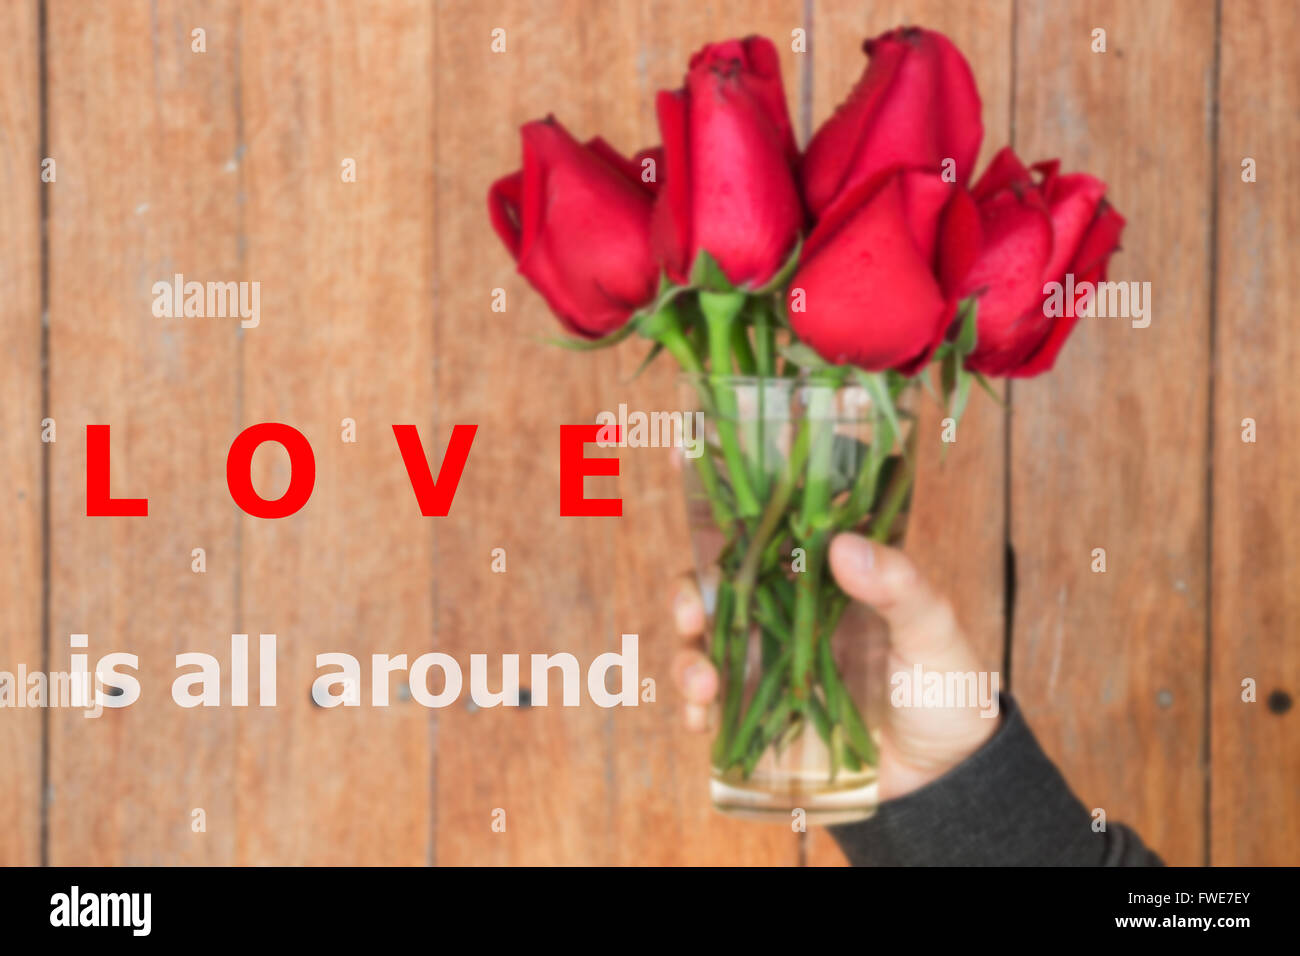 Love is all around quote design poster, stock photo Stock Photo